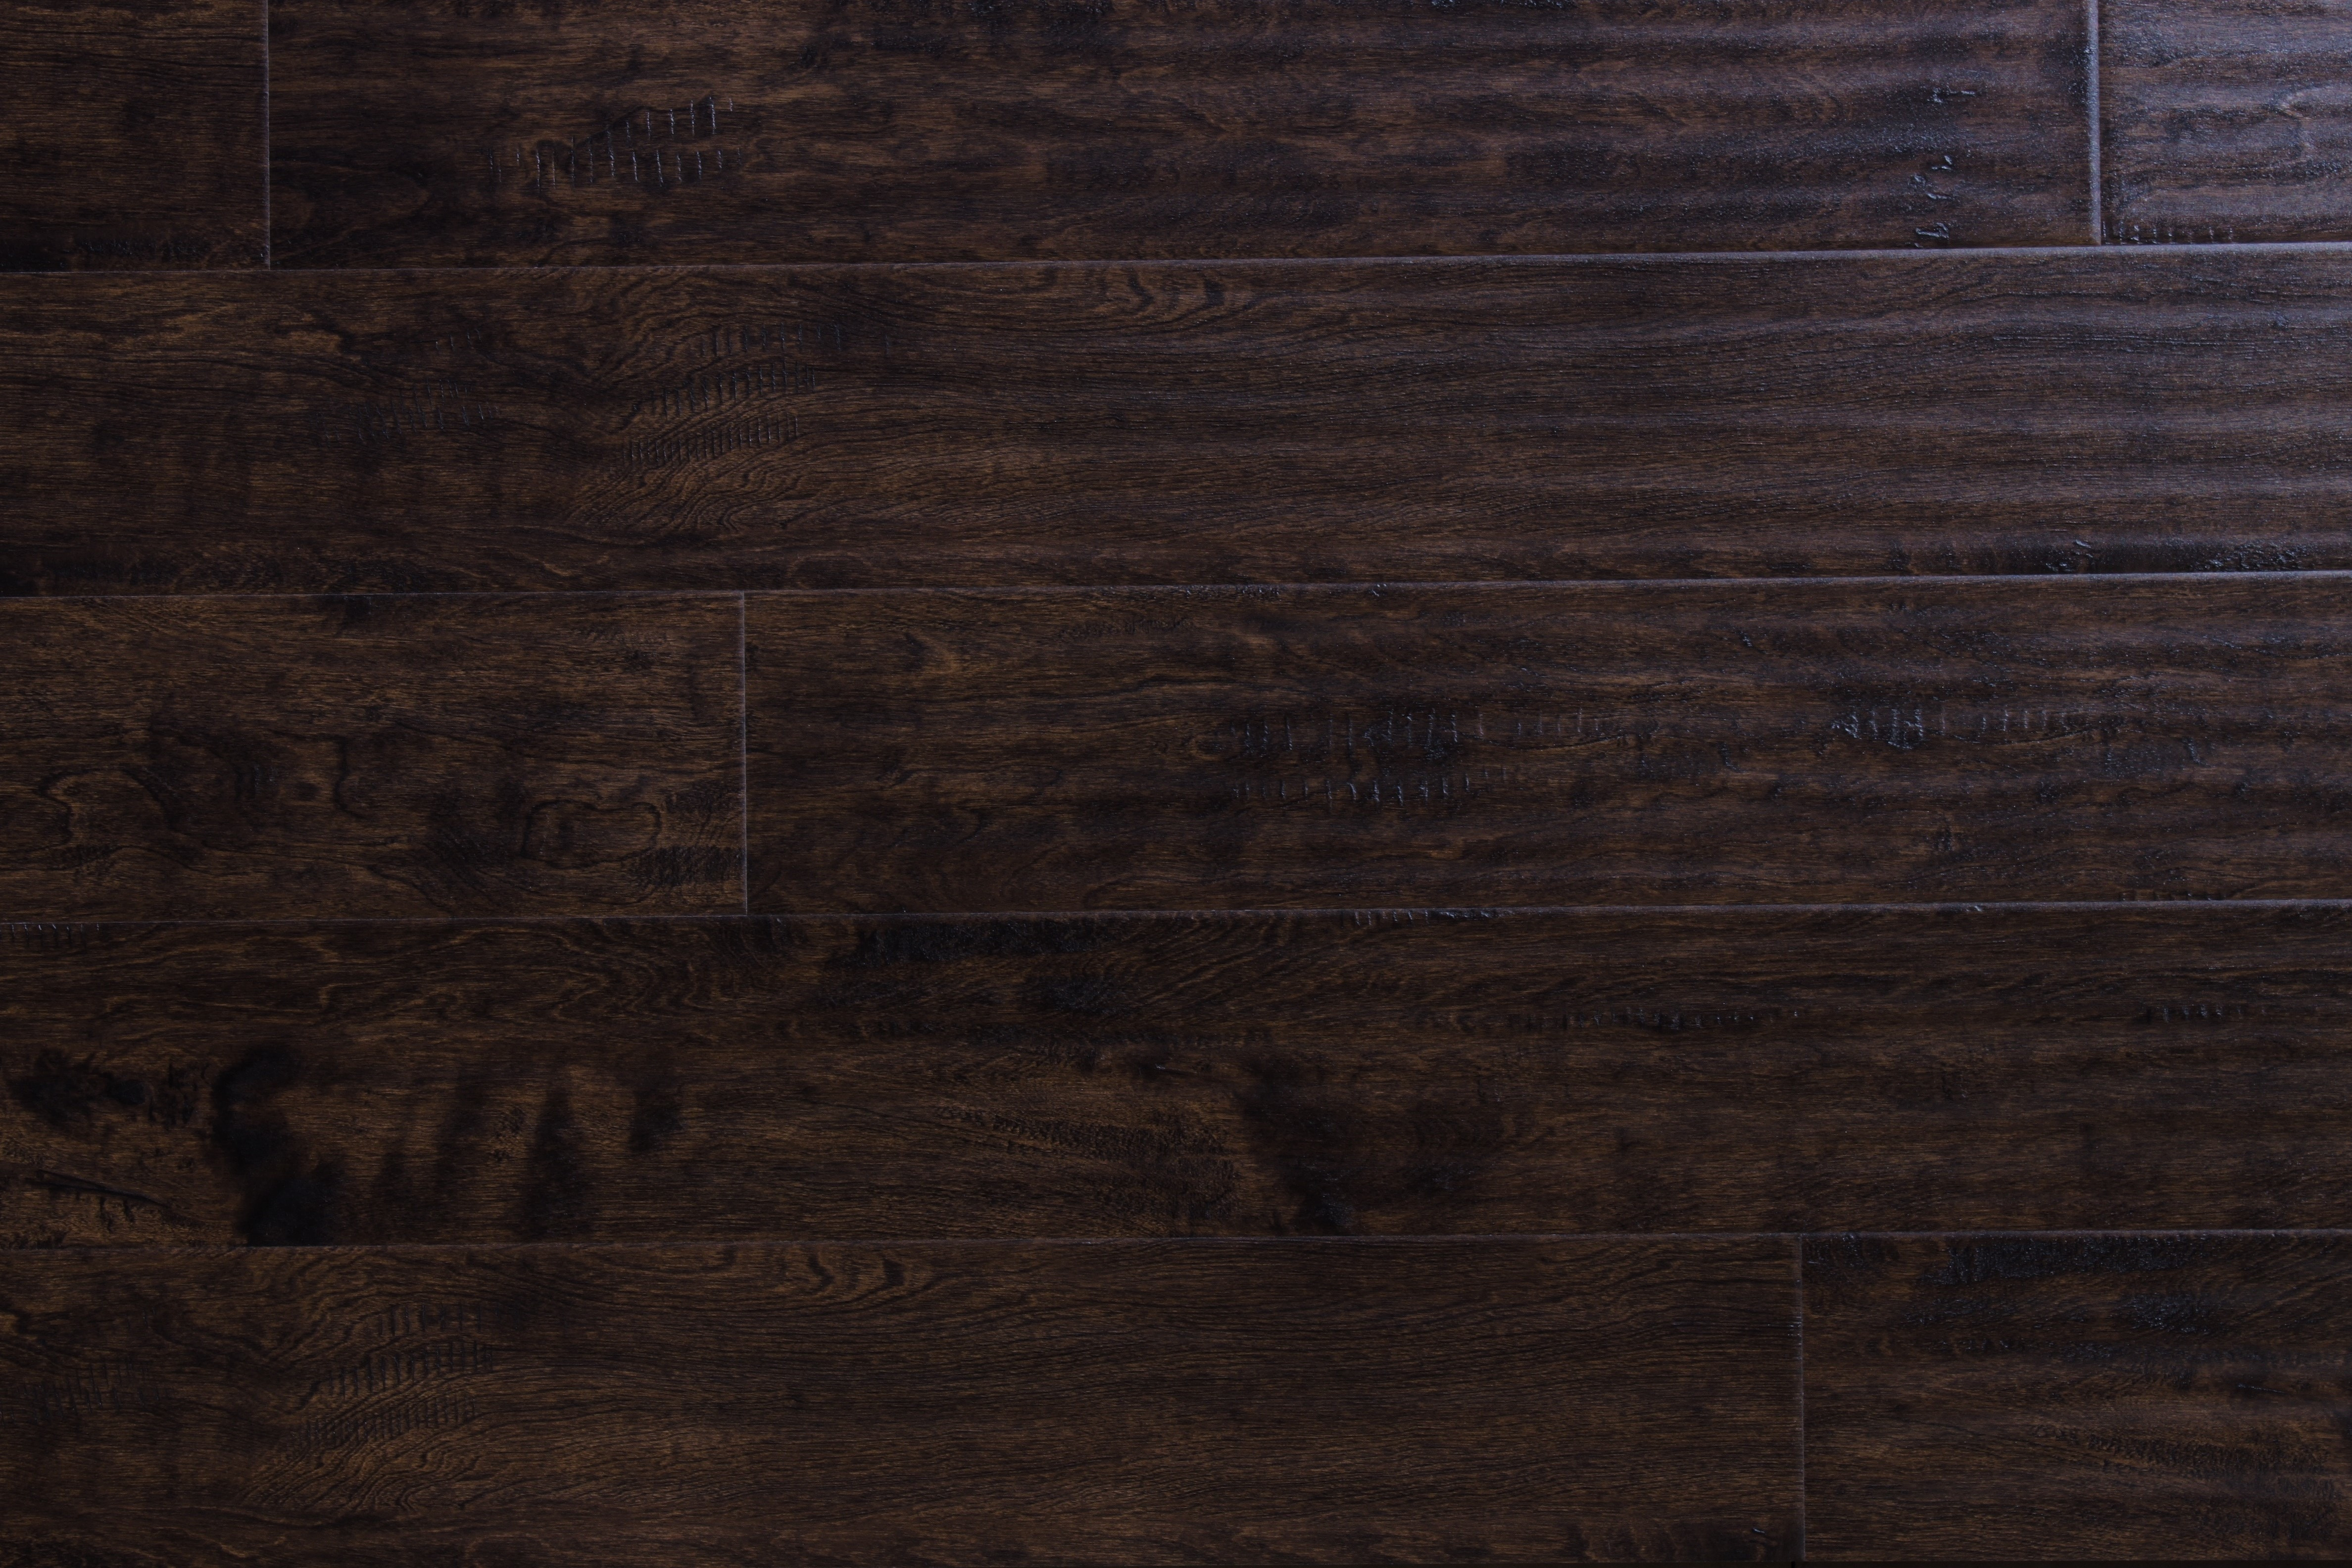 Hardwood Flooring Chattanooga Of Wood Flooring Free Samples Available at Builddirecta Intended for Tailor Multi Gb 5874277bb8d3c